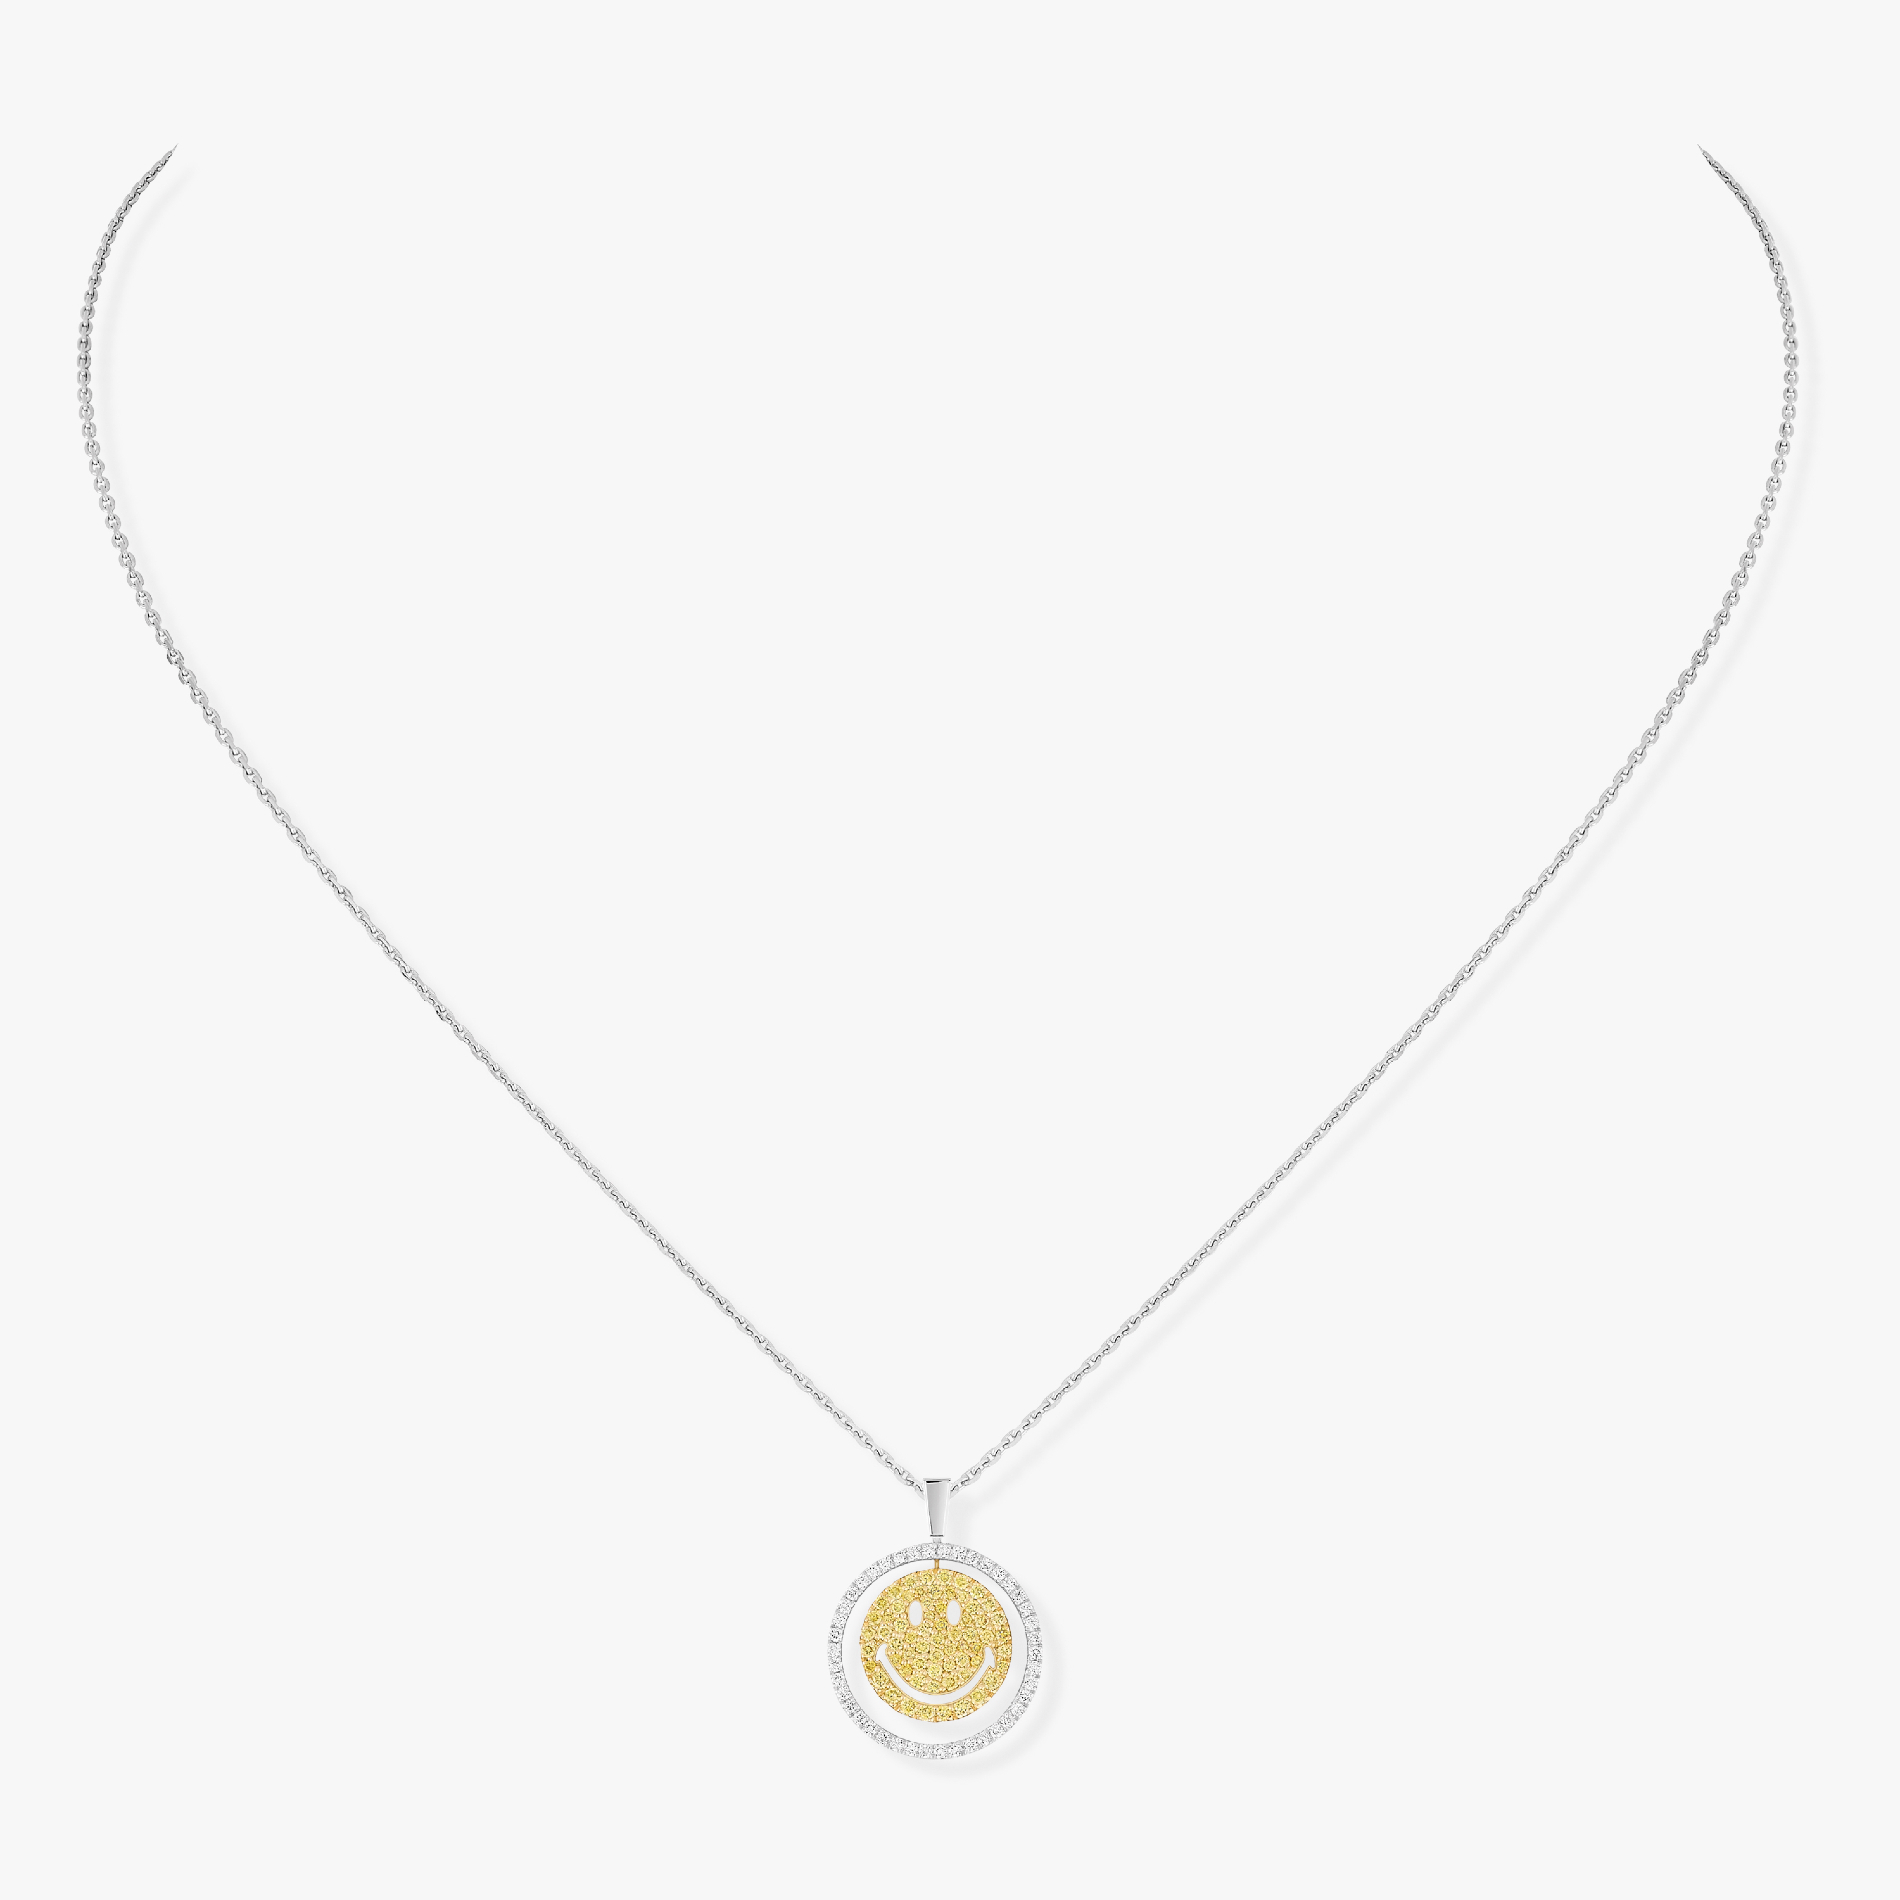 Collier Femme Or Blanc Diamant Collier Smiley PM 12265-WY